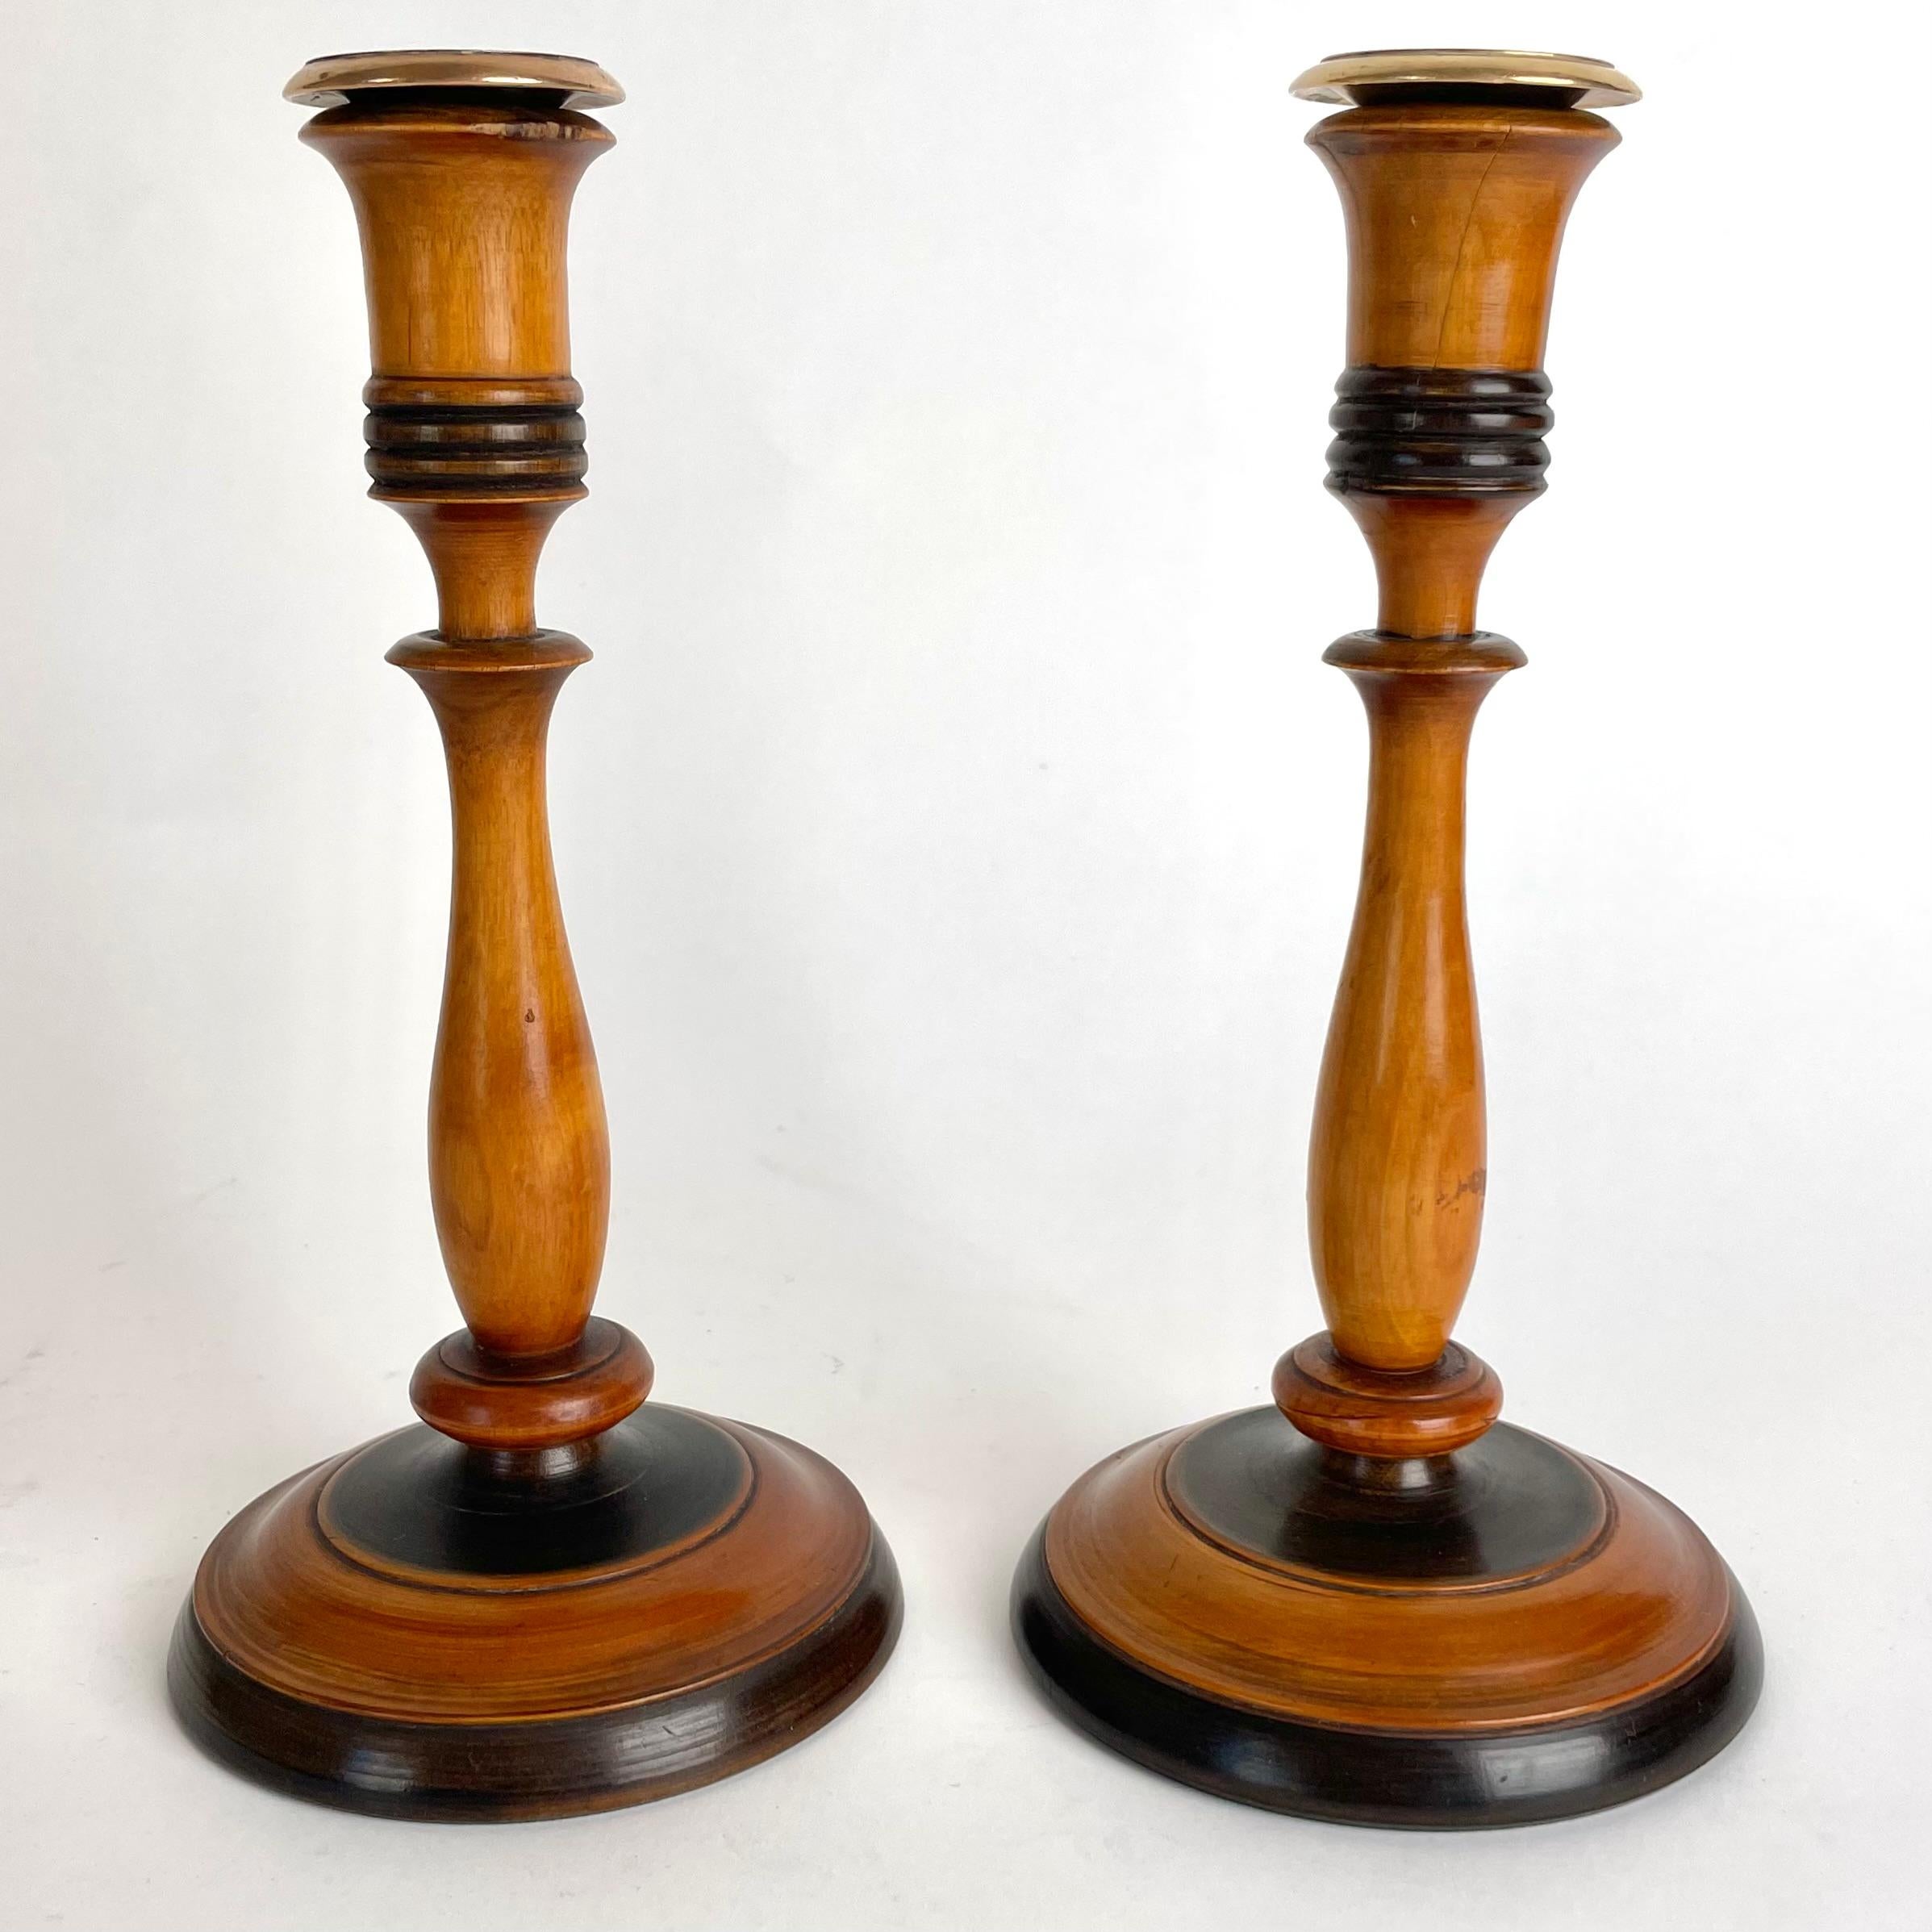 A pair of charming Birch Candlesticks in Swedish Karl-Johan (Swedish Empire) from the 1820s-1830s. Made in light birch with darker details and brass light cuffs. Minor crack in the light holder. See picture


Wear consistent with age and use 